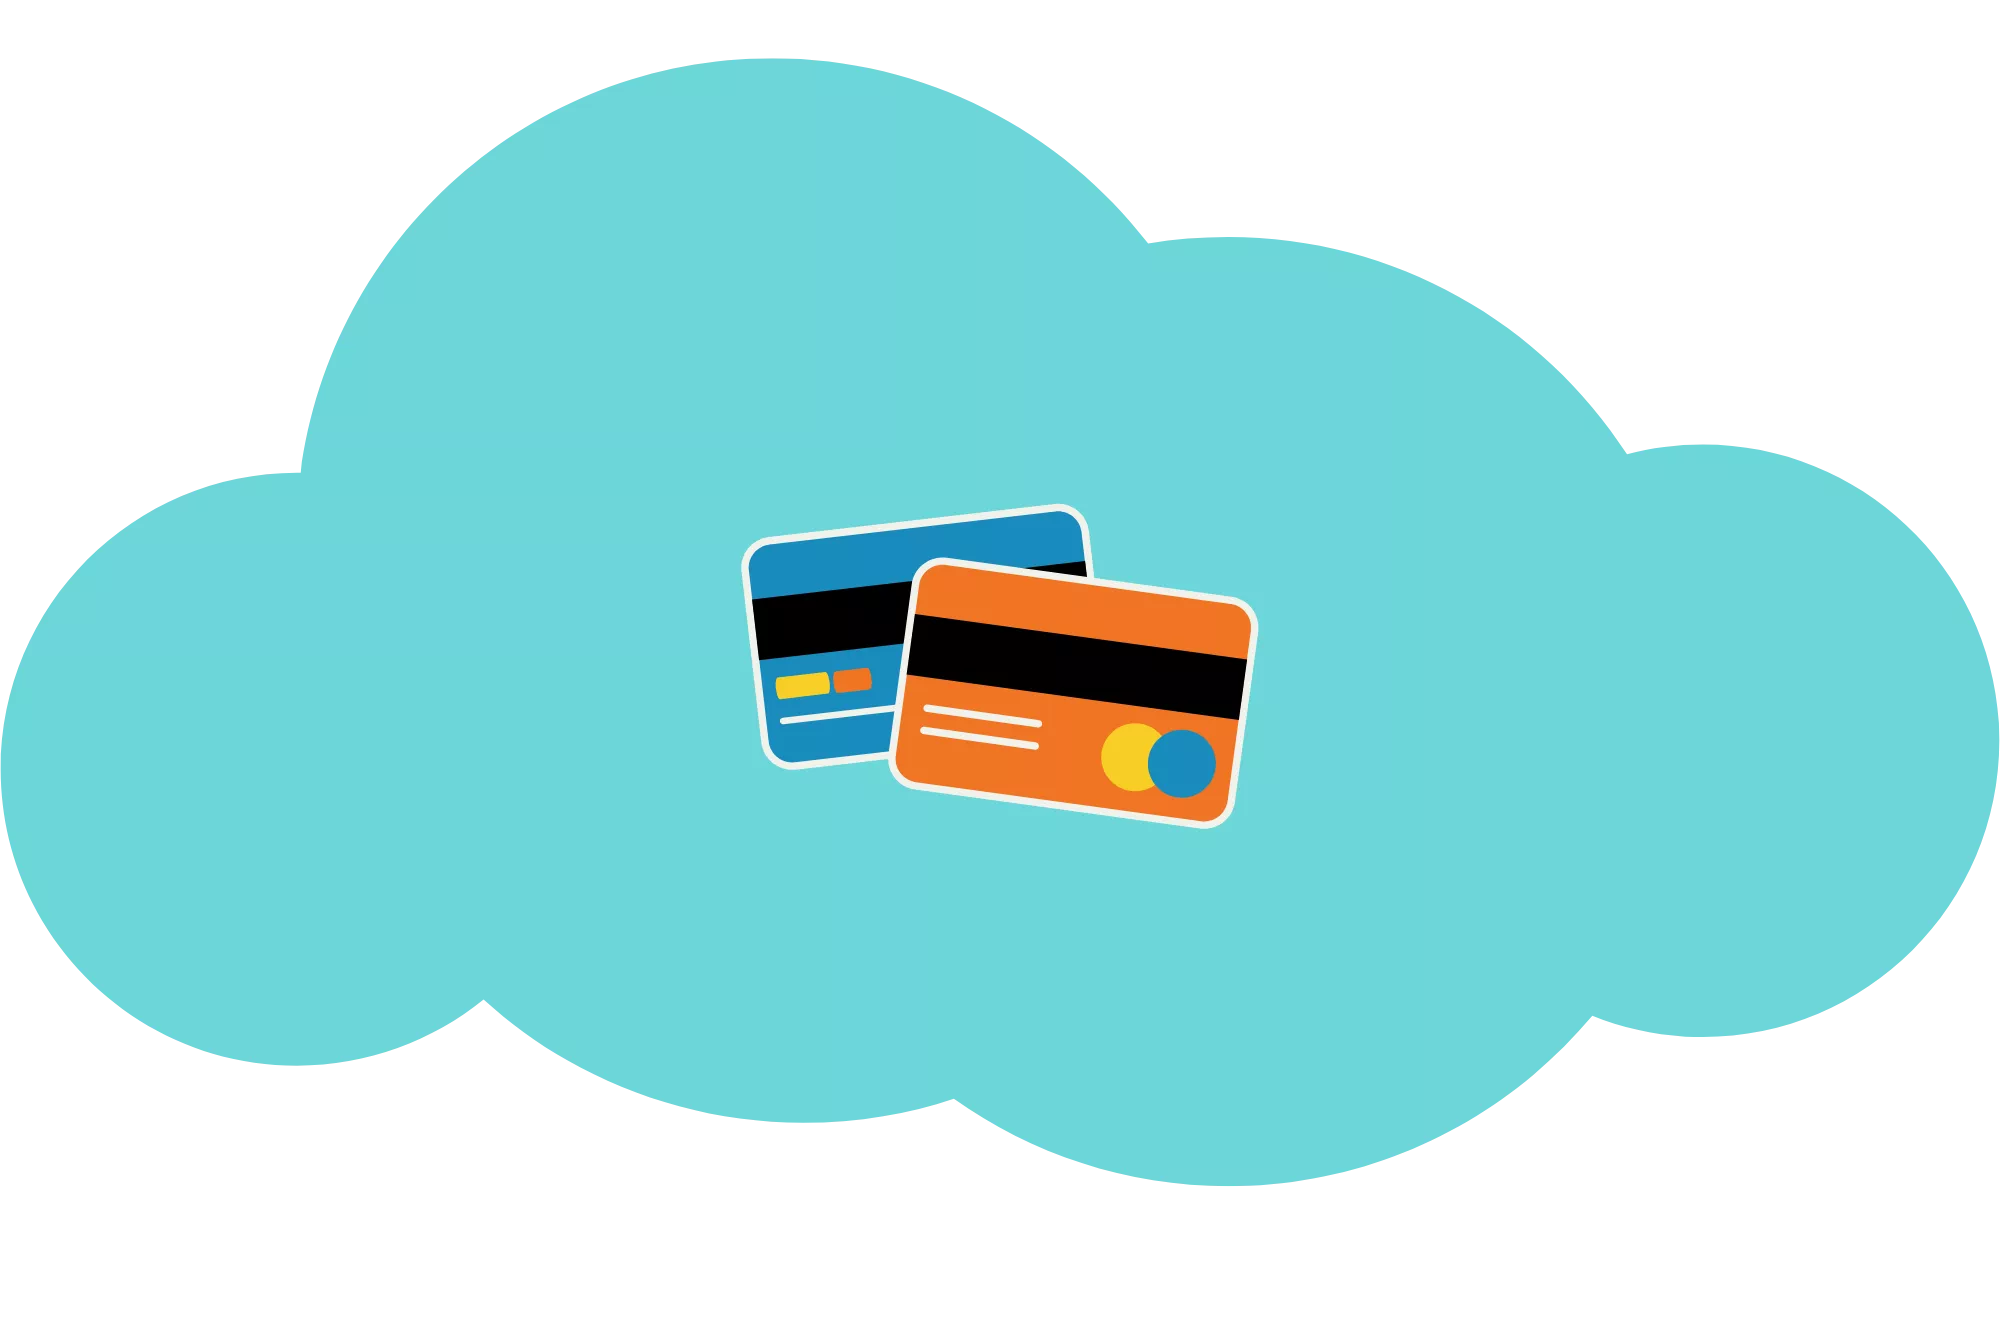 A cloud with credit cards in it to represent an intelligent routing payment network.